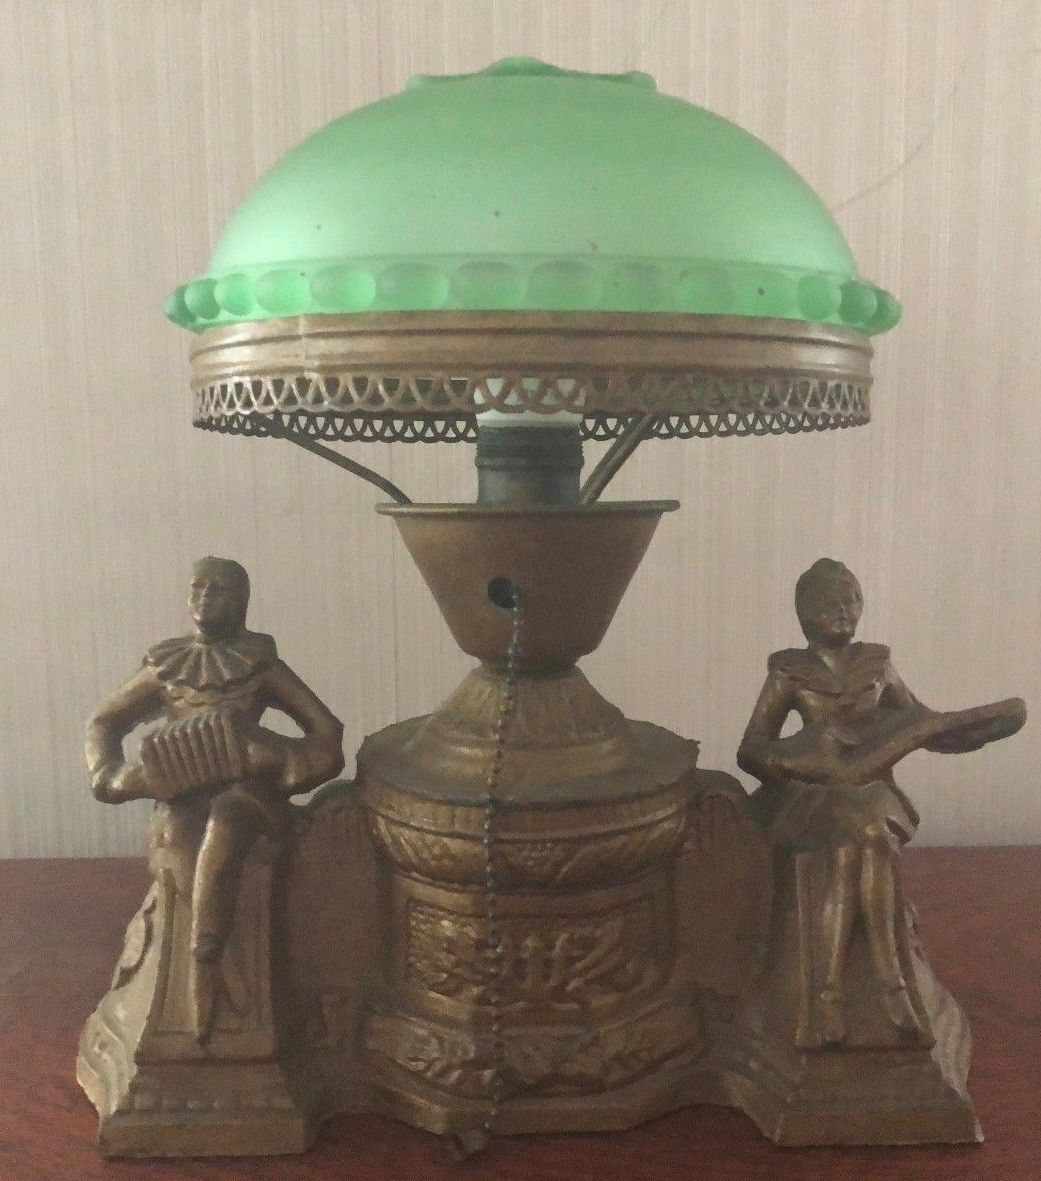 FRANK ART TABLE LAMP WITH GREEN GLASS DOMED SHADE